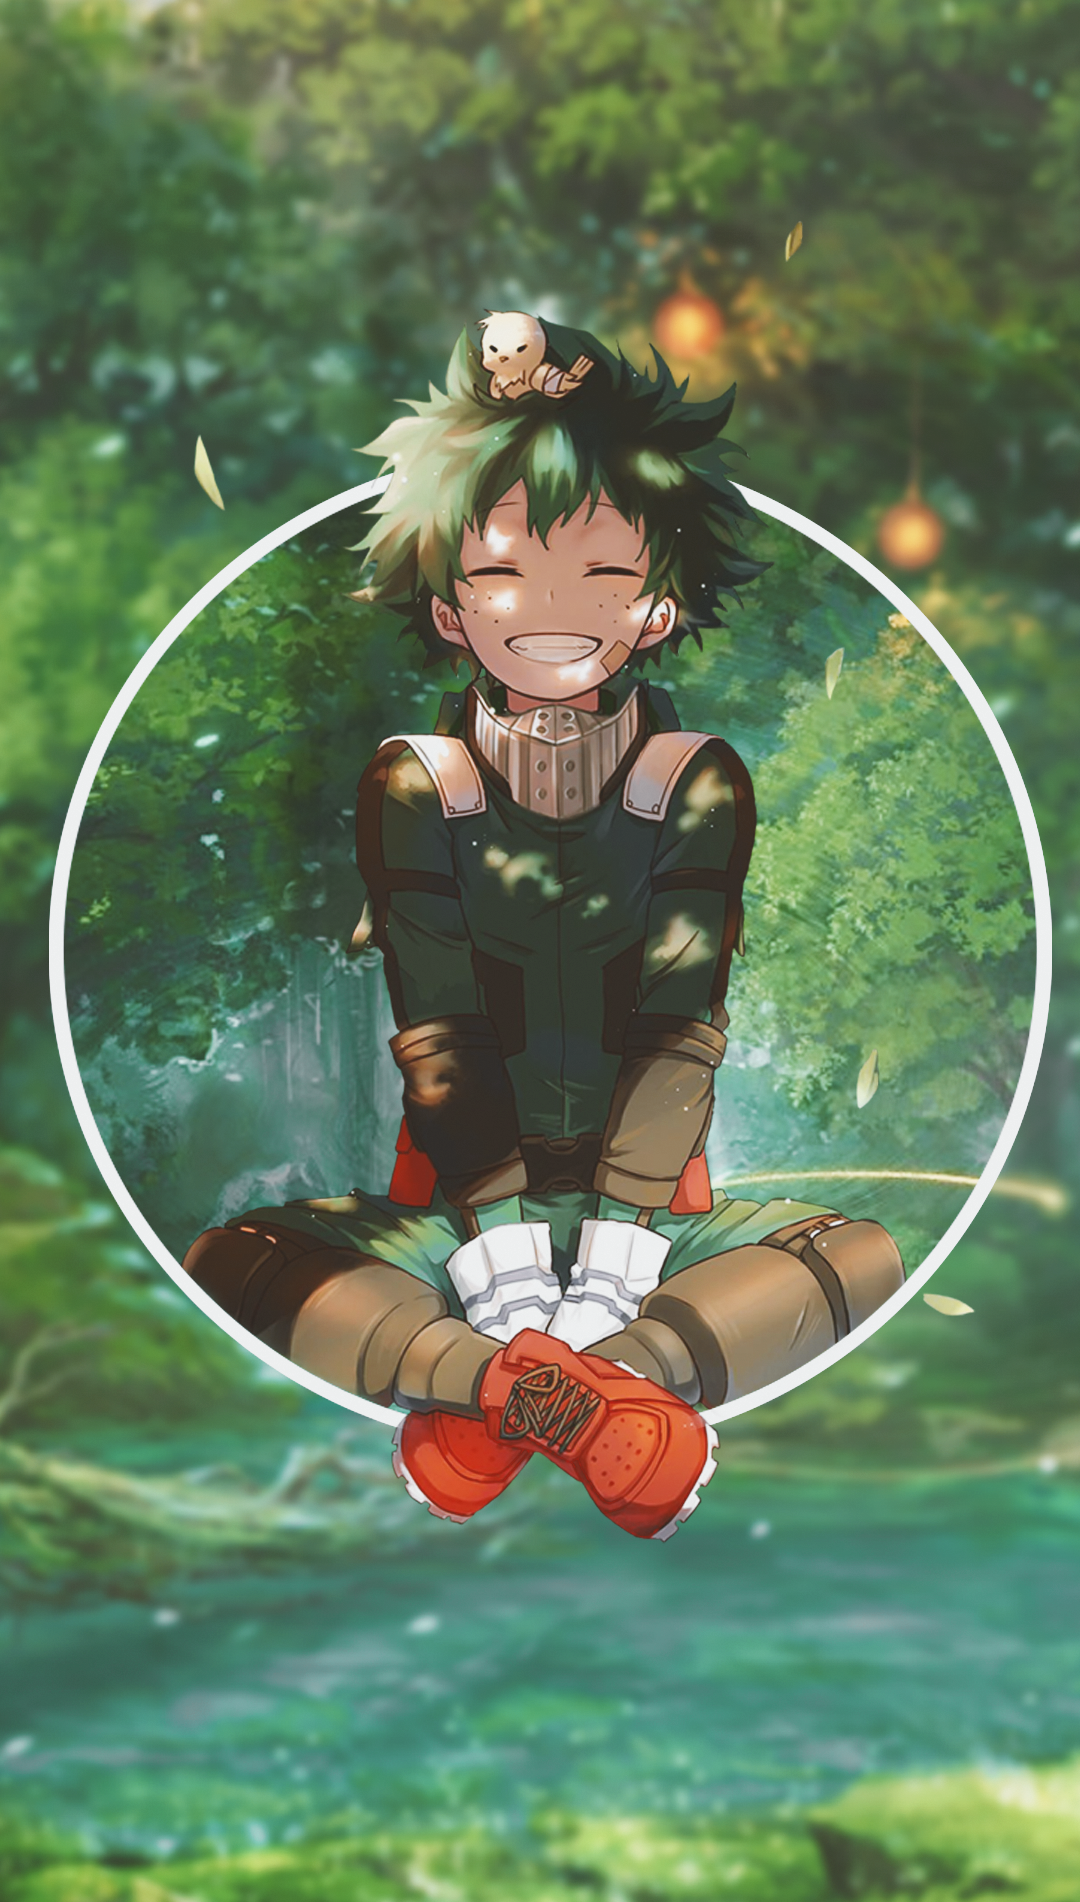 Anime 1080x1902 anime picture-in-picture Boku no Hero Academia anime boys smiling